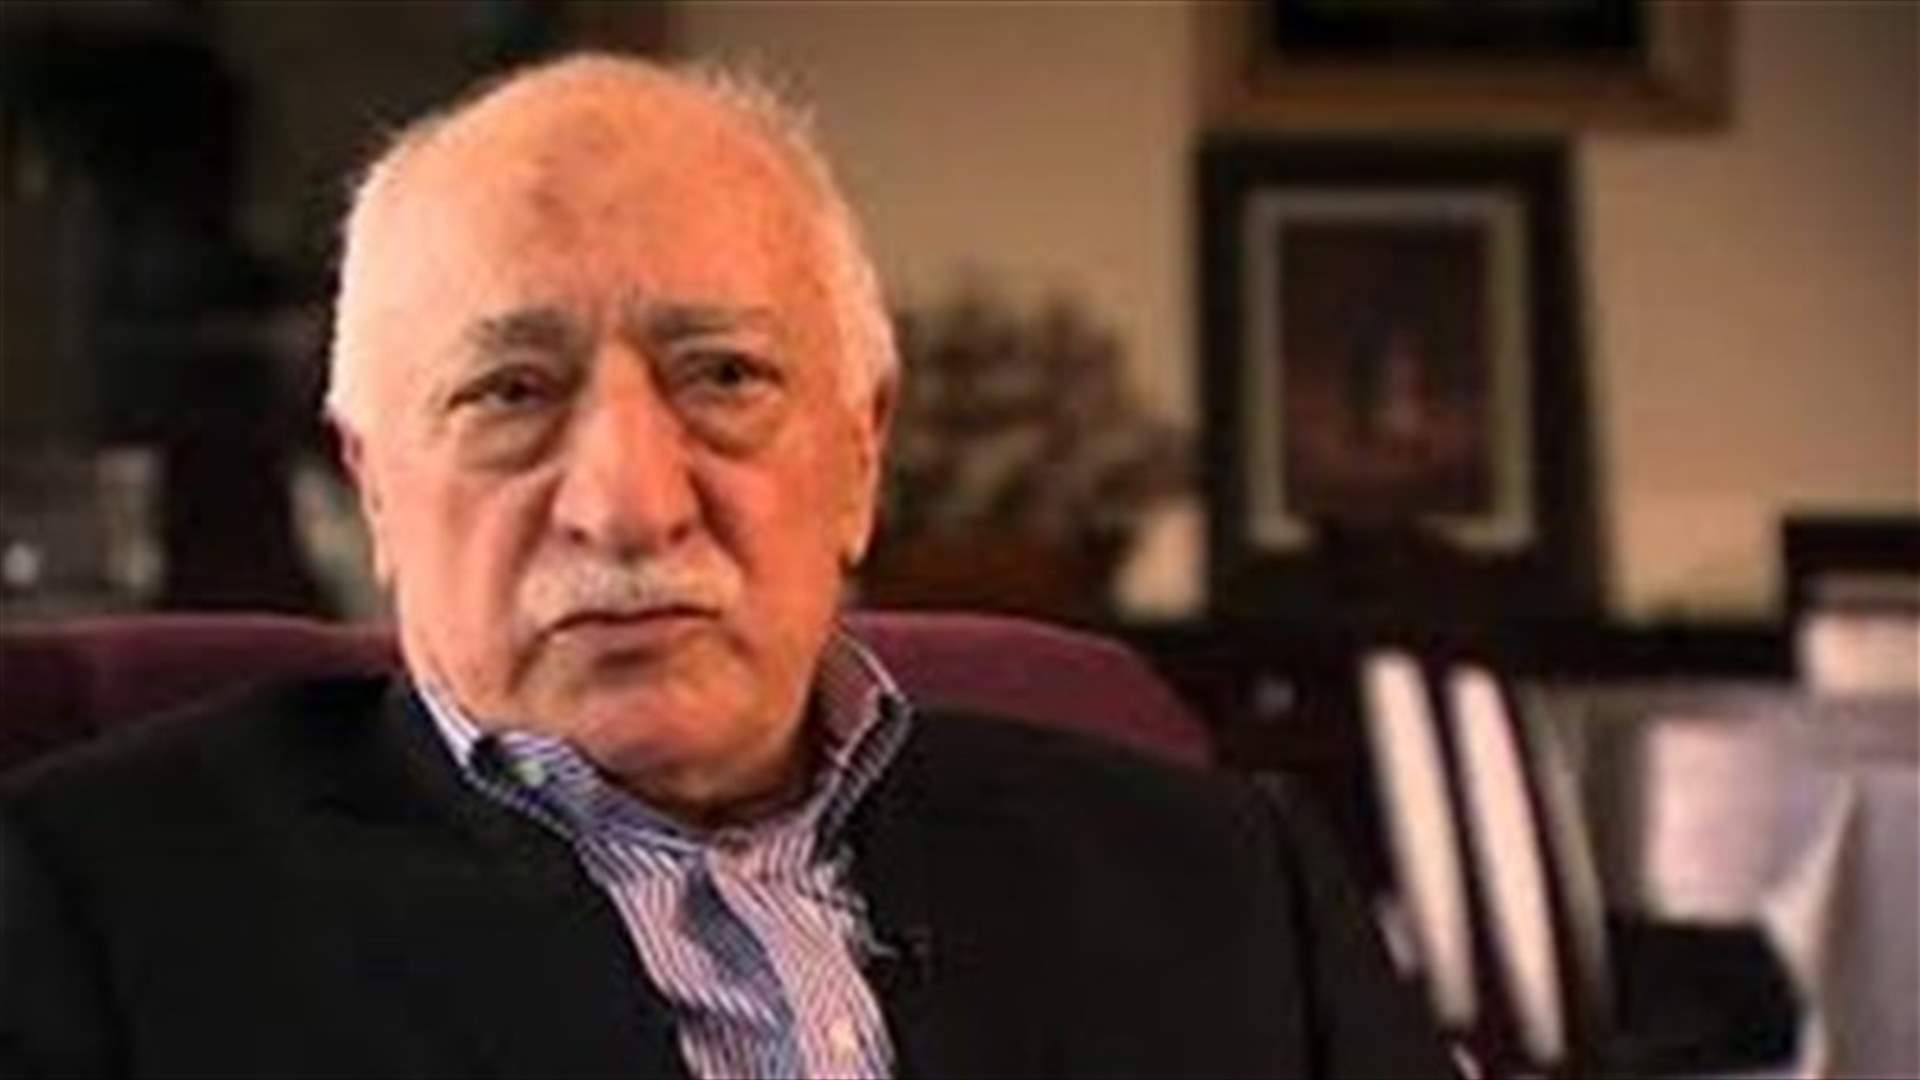 Turkey urges extradition of Muslim cleric over failed coup